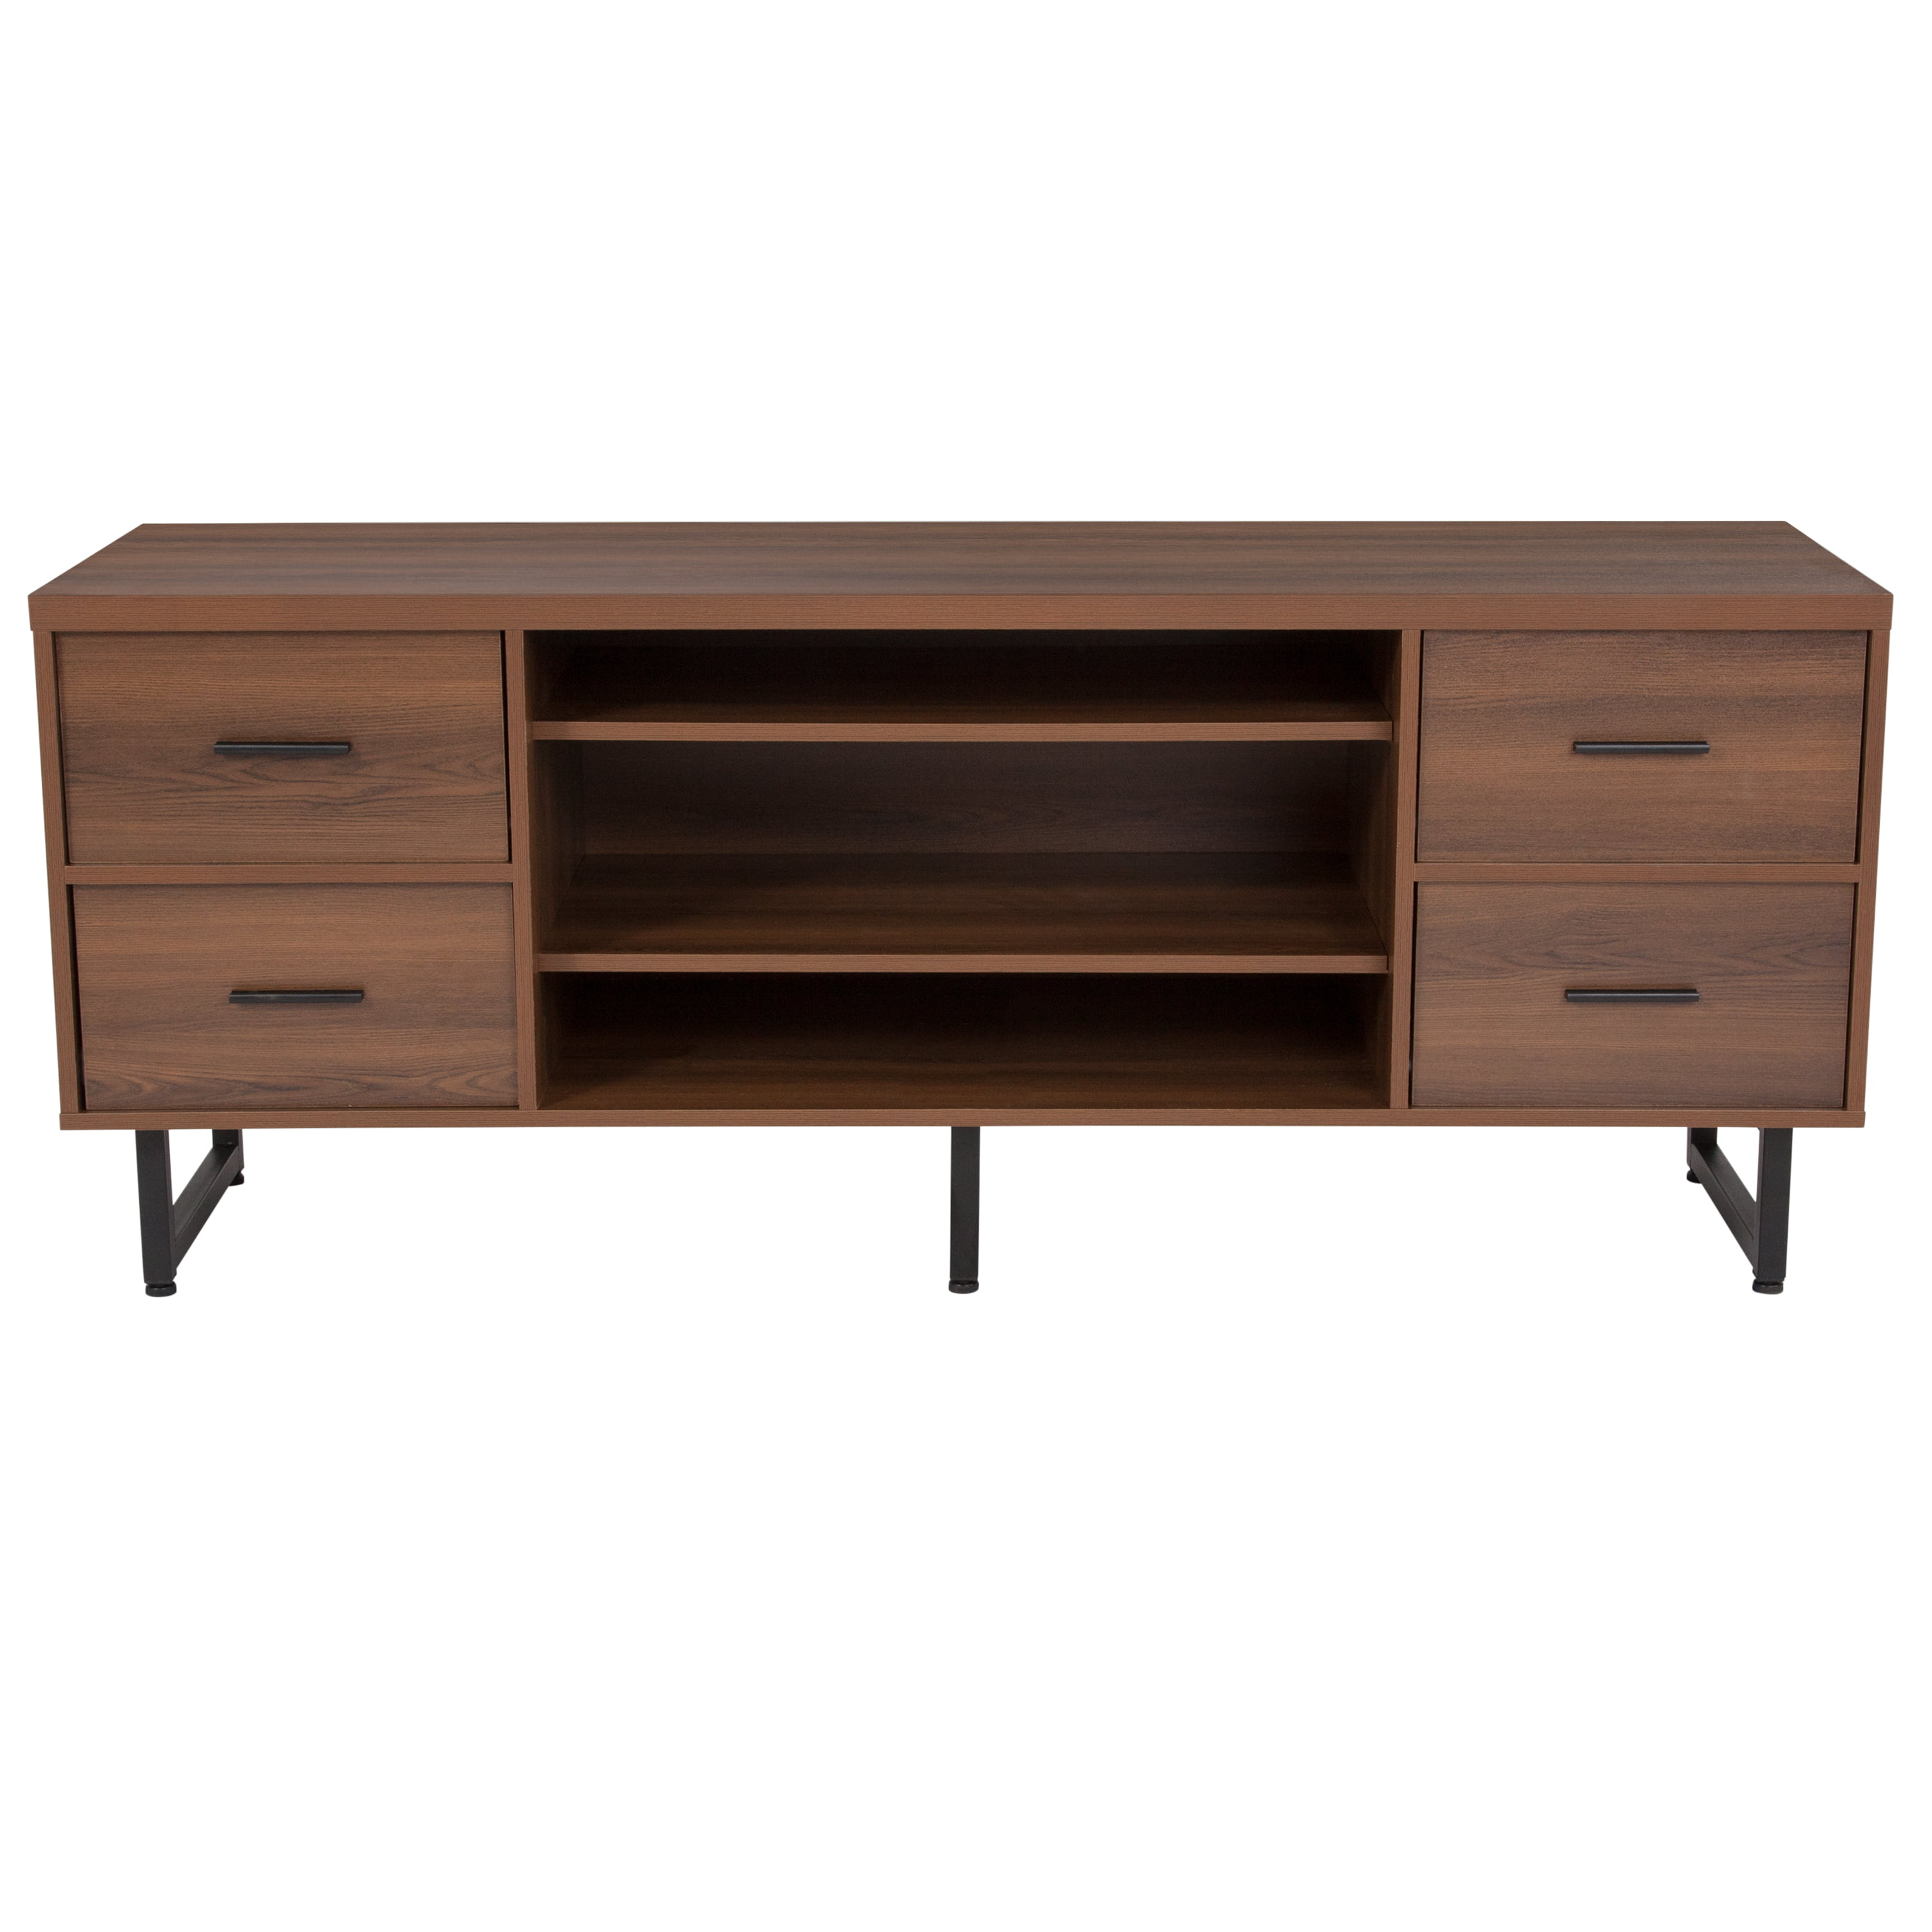 Flash Furniture Lincoln Collection TV Stand in Rustic Wood Grain Finish